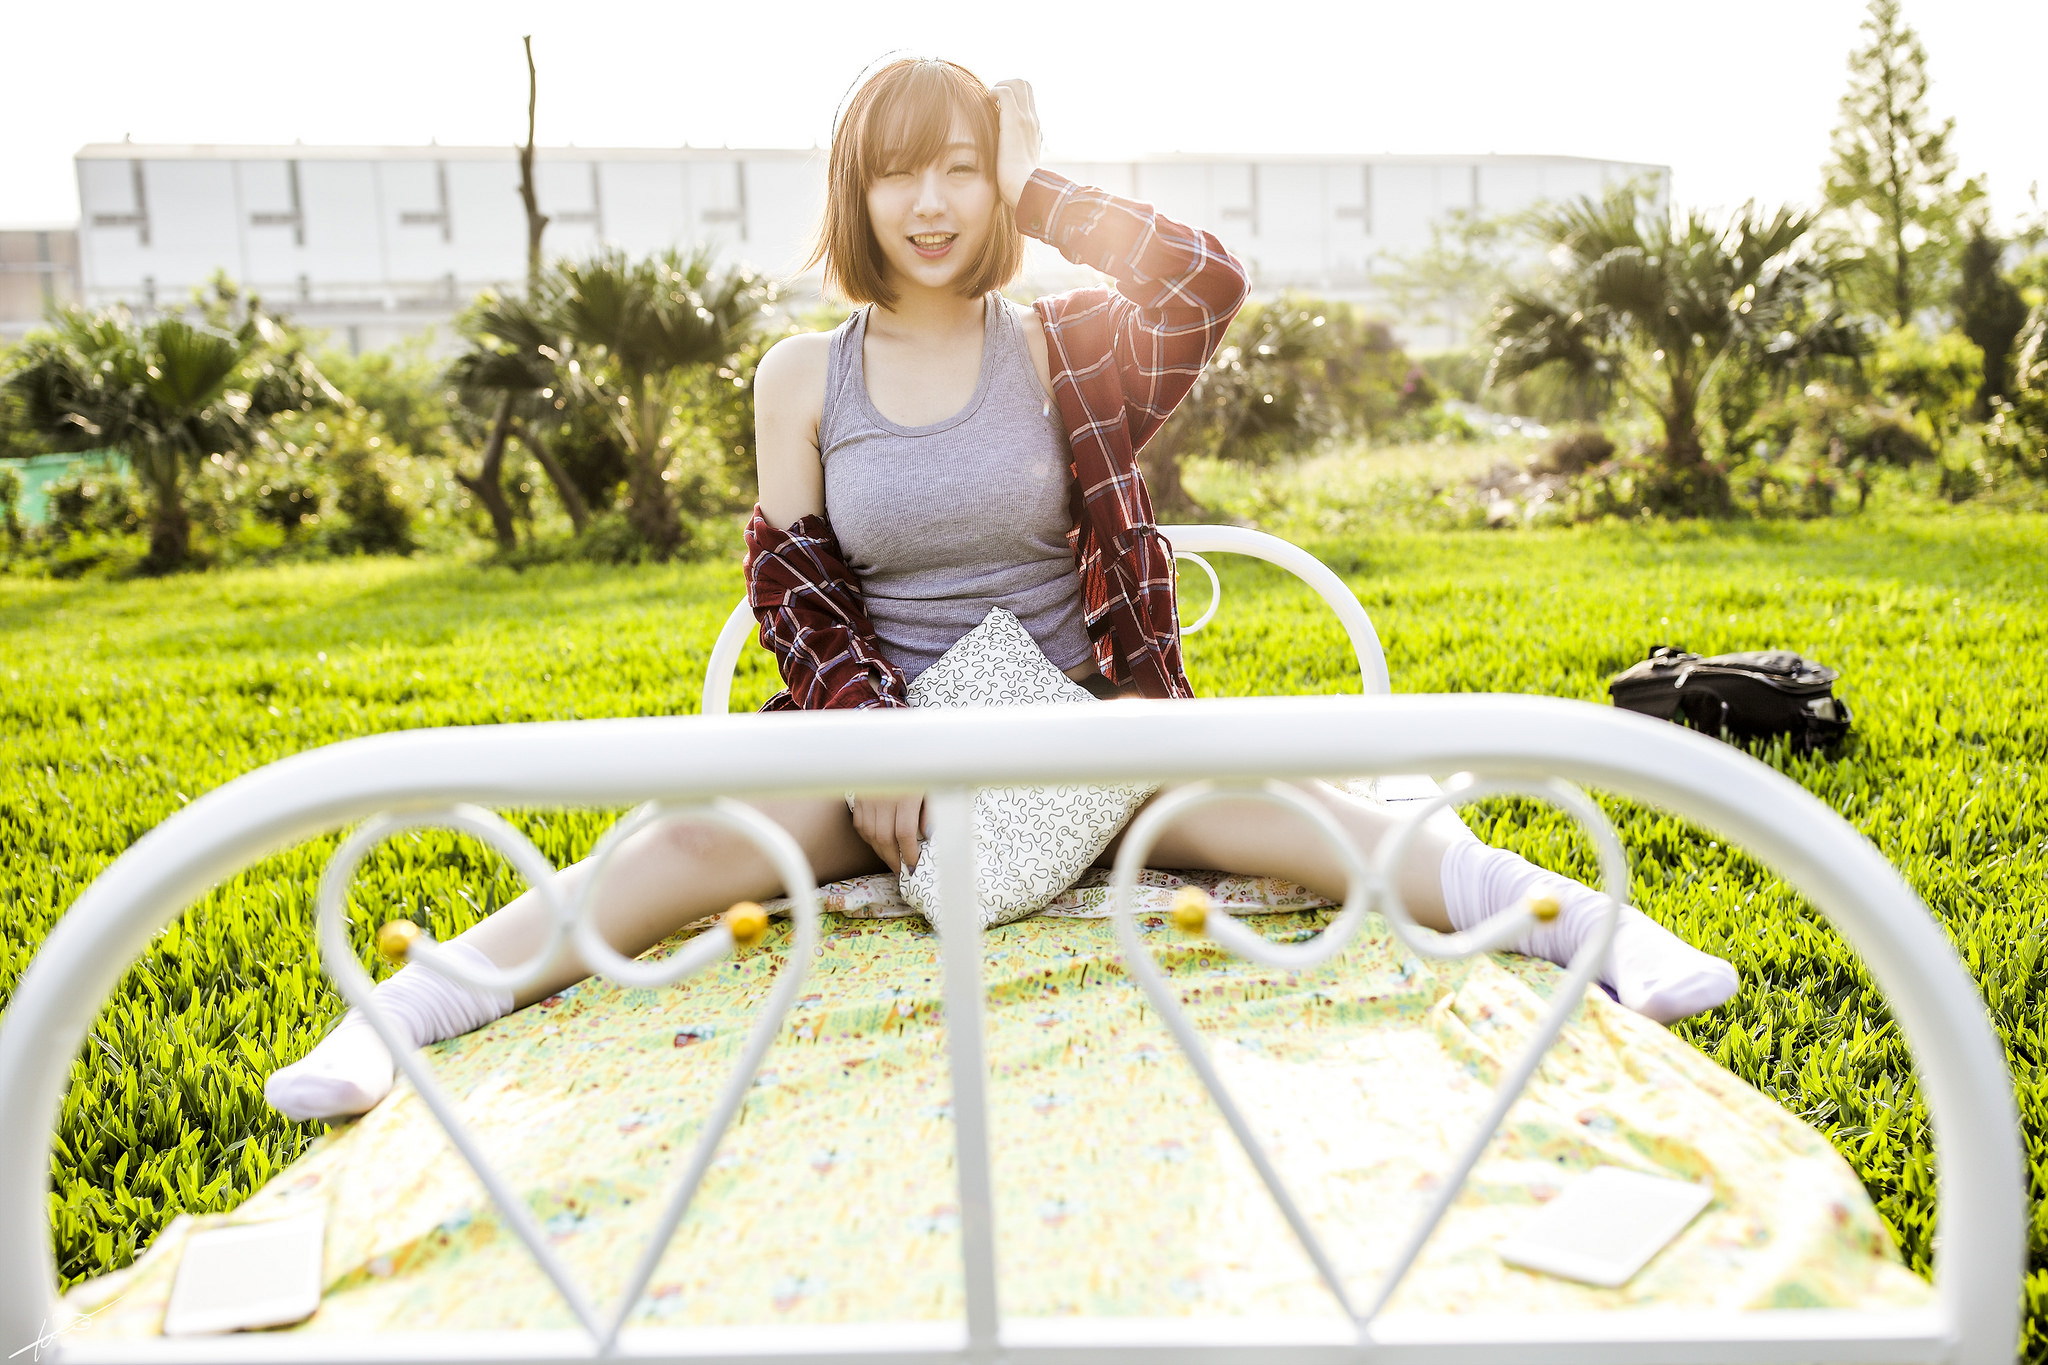 People 2048x1365 women model Asian brunette looking at viewer sitting socks tank top short hair hands on head open shirt in bed smiling women outdoors slouch socks white socks pointed toes spread legs grass